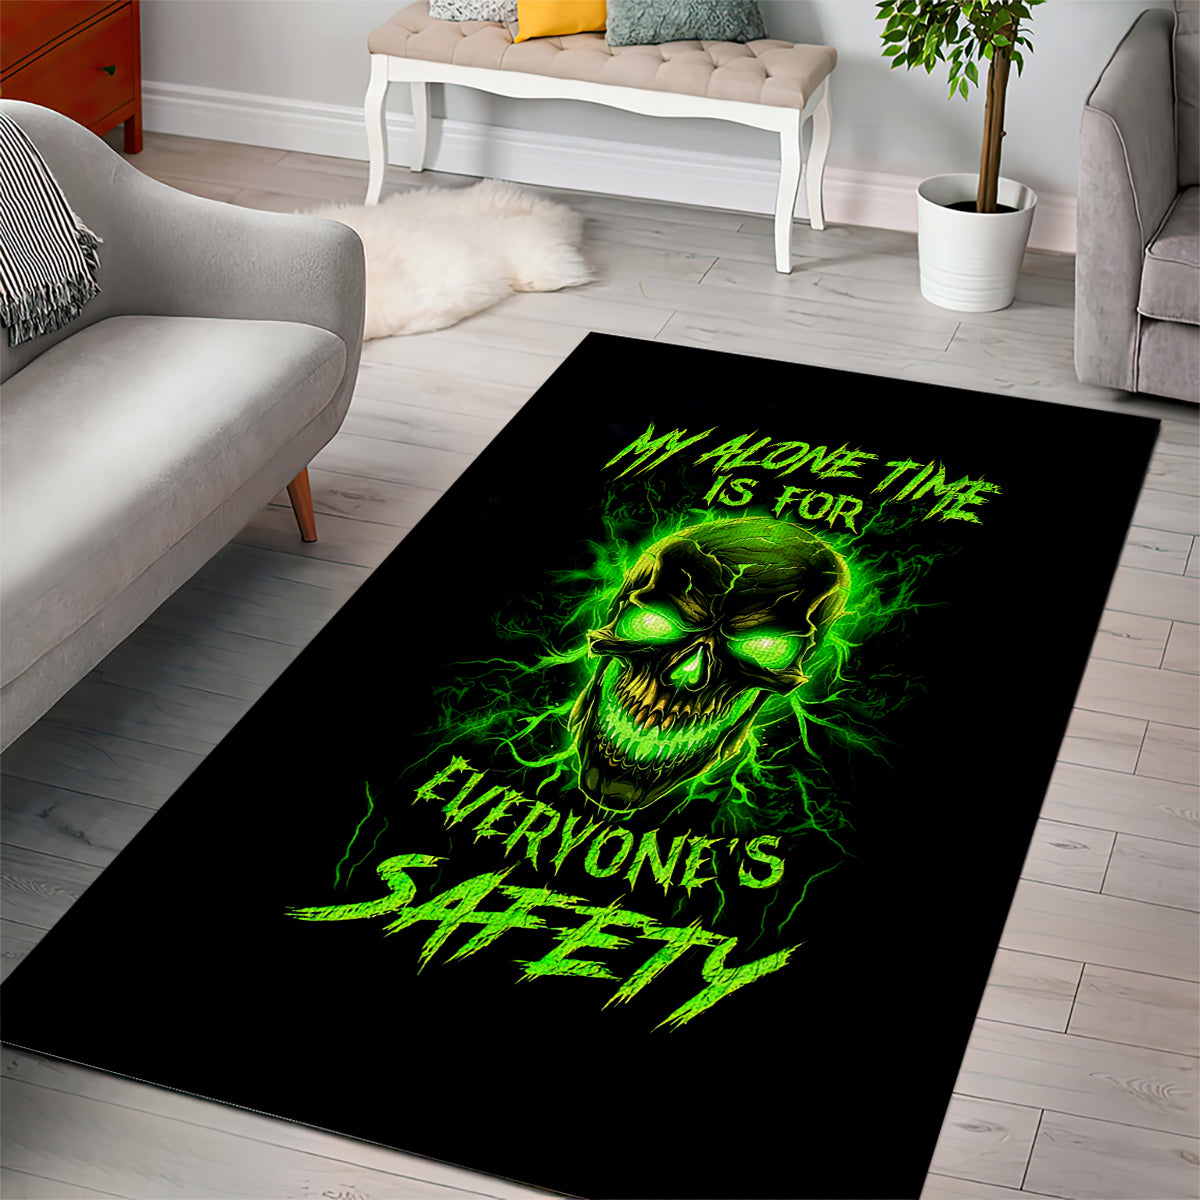 flame-skull-area-rug-my-alone-time-is-for-everyone-safe